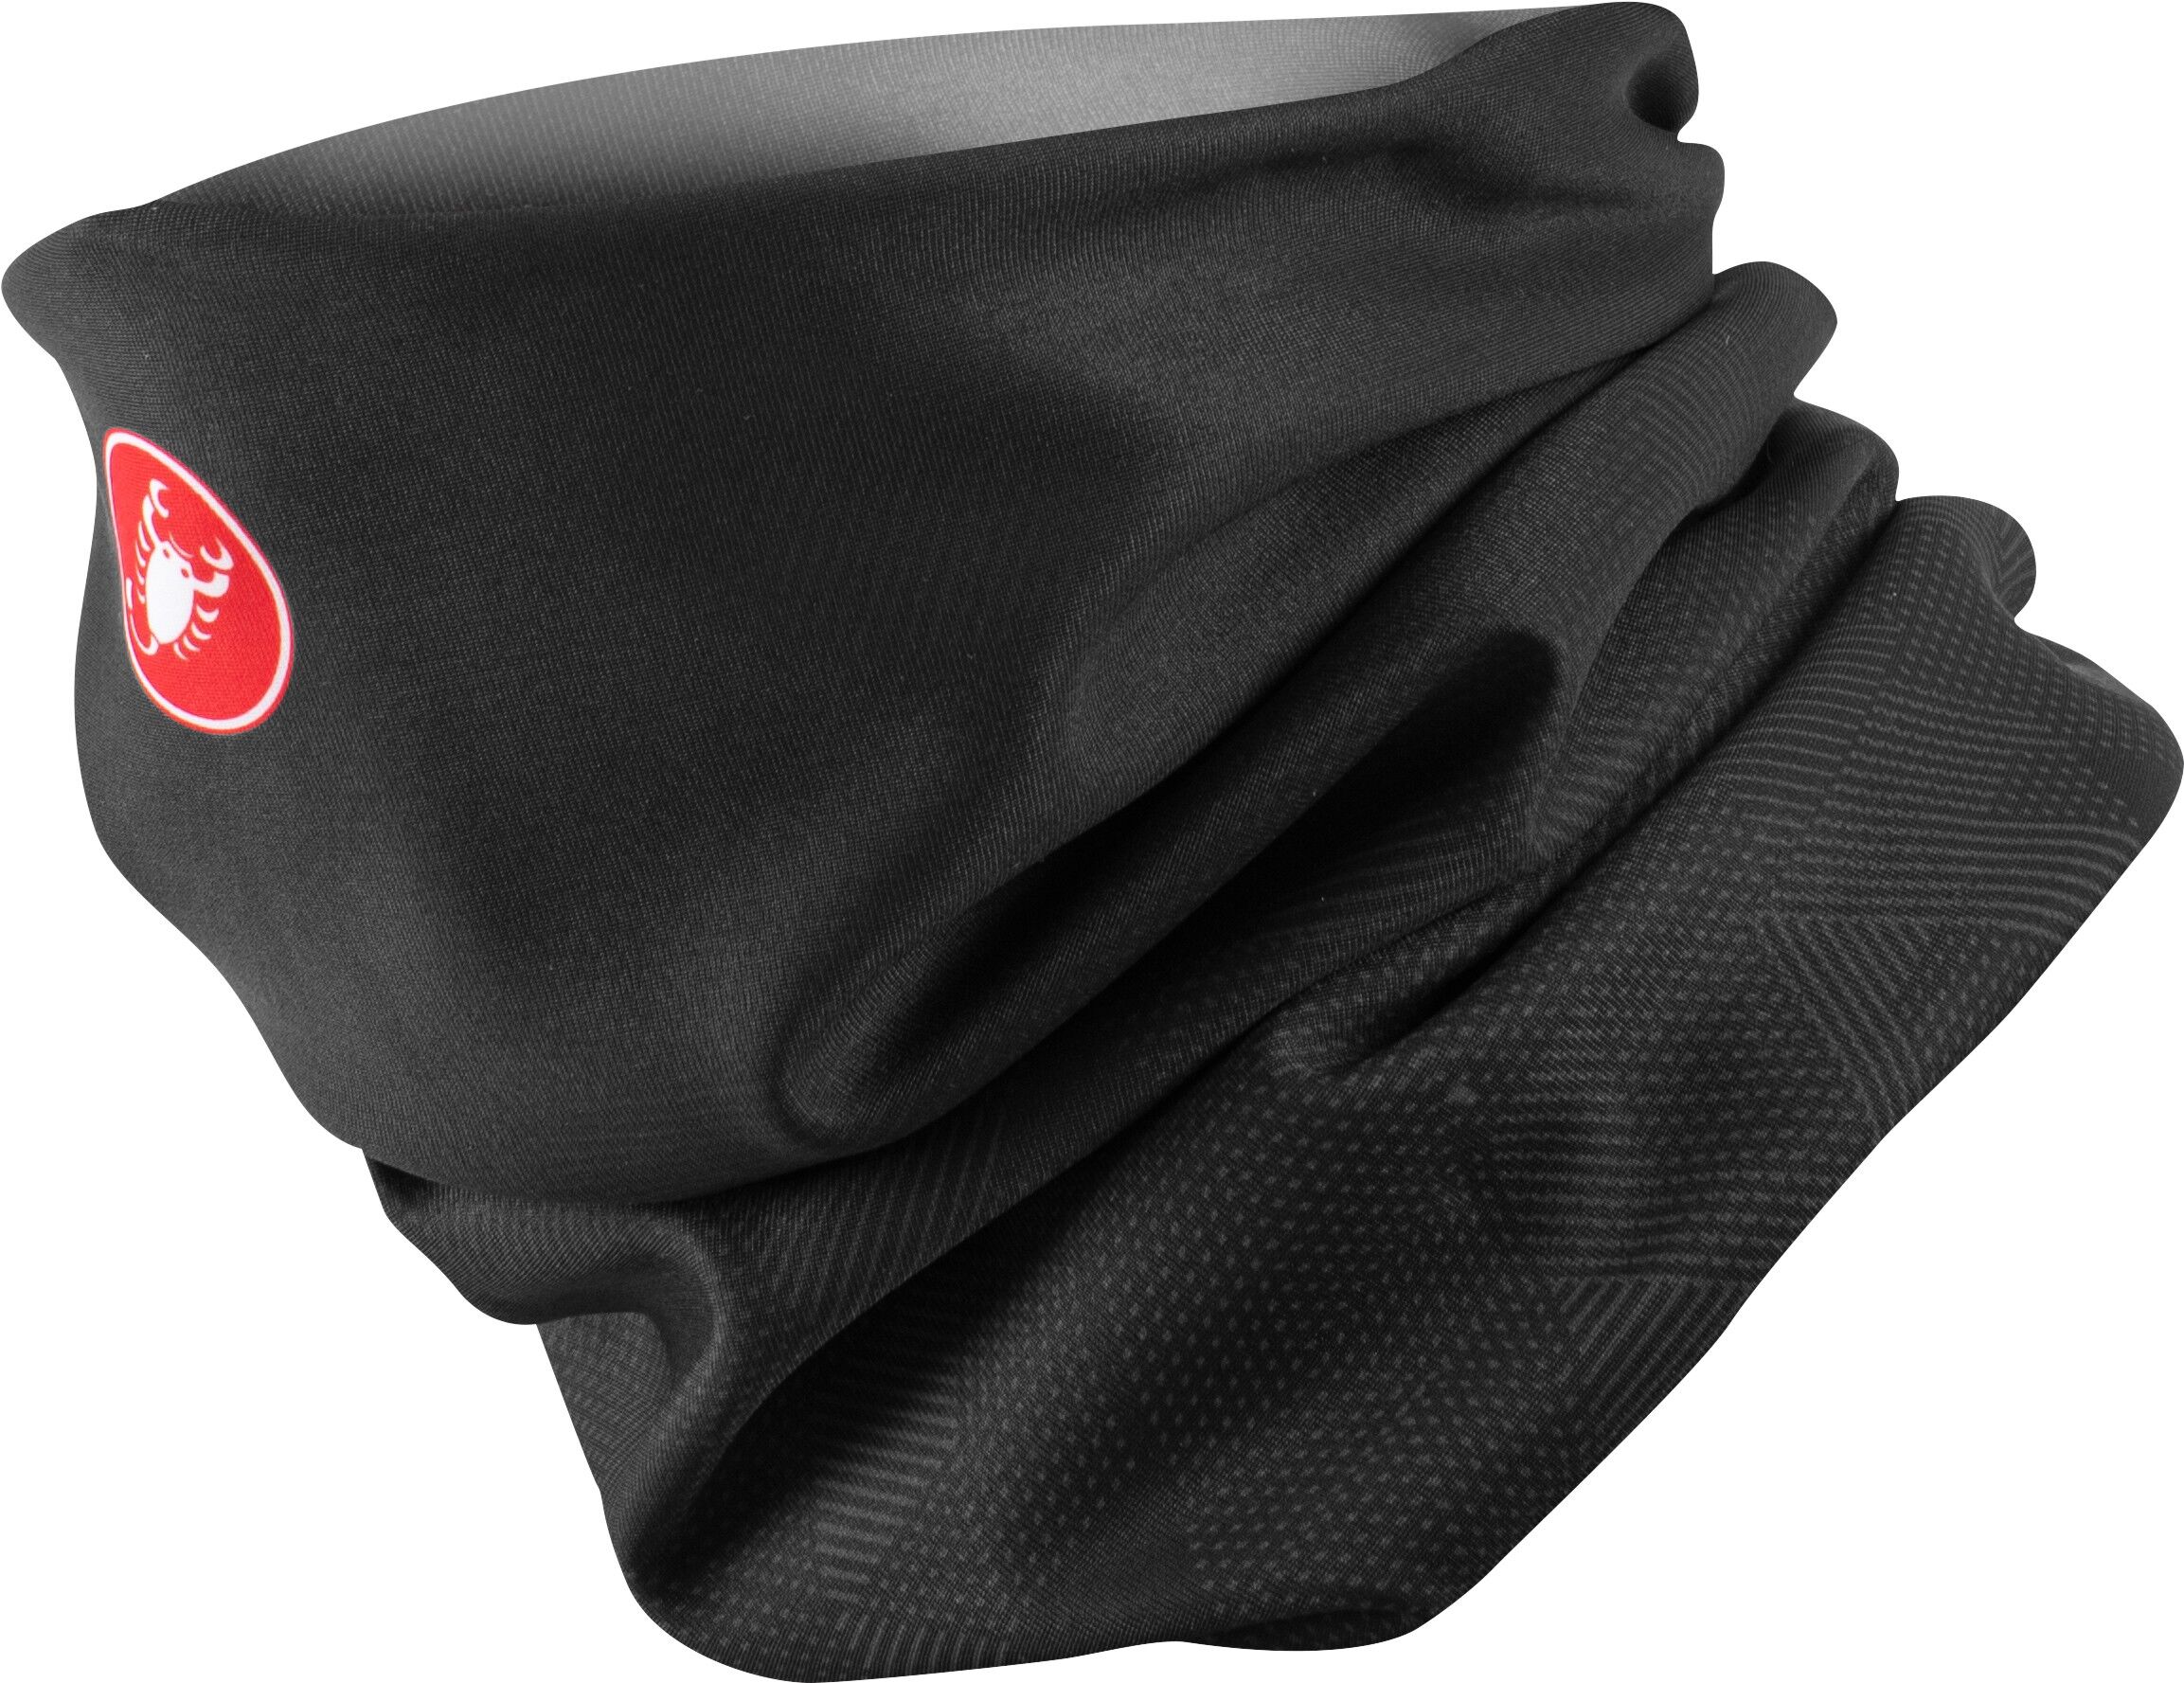 Castelli Pro Thermal Head Thingy - Neck warmer